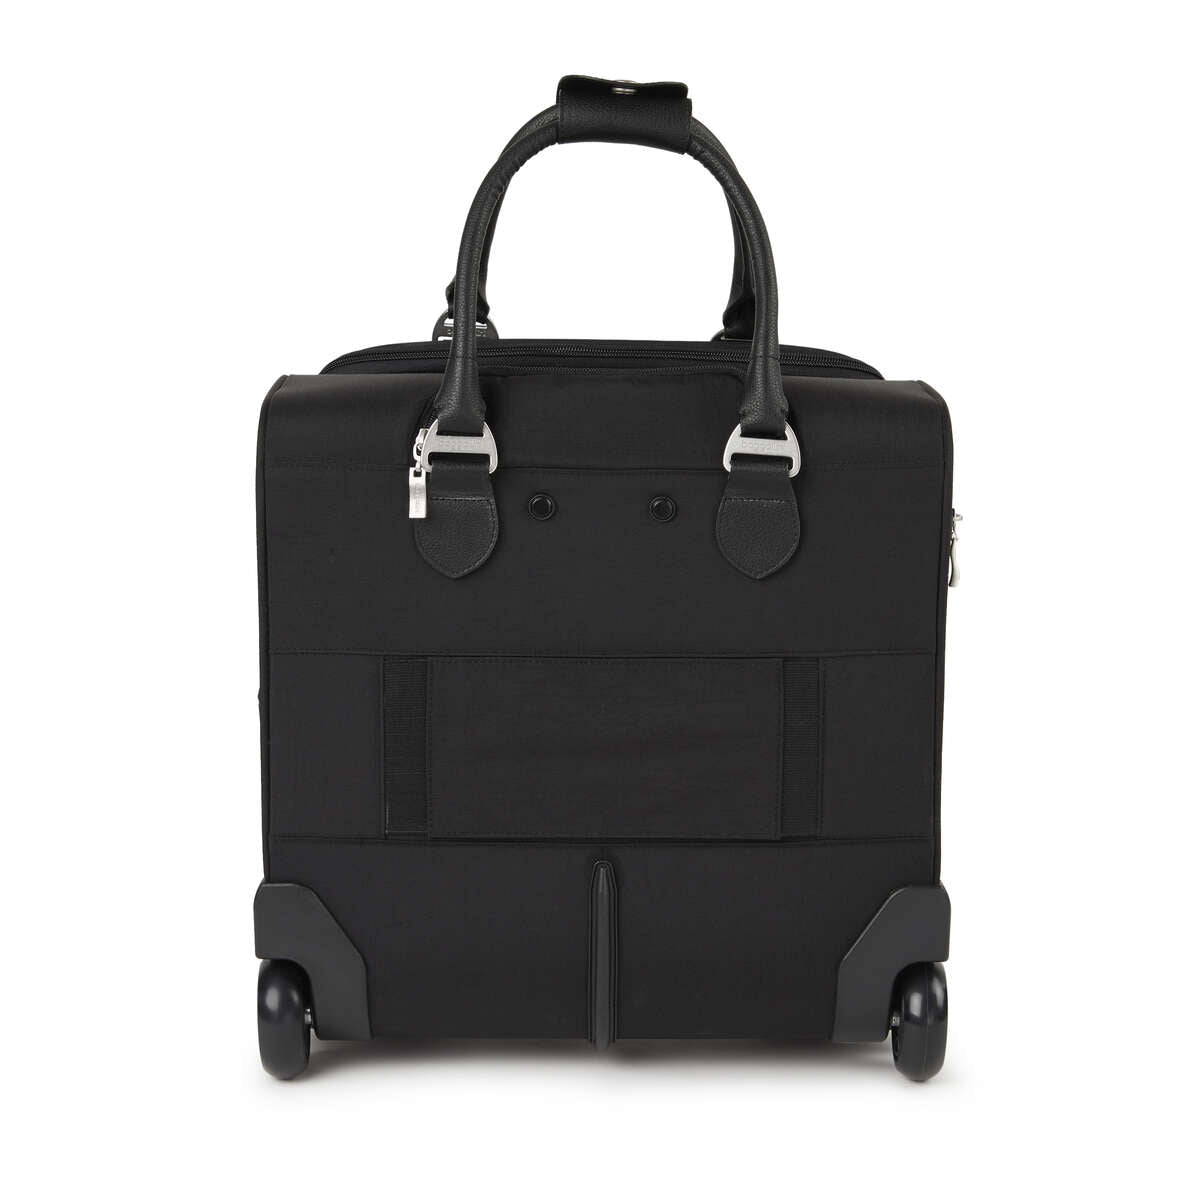 Baggallini 2 Wheel Underseat Carry On